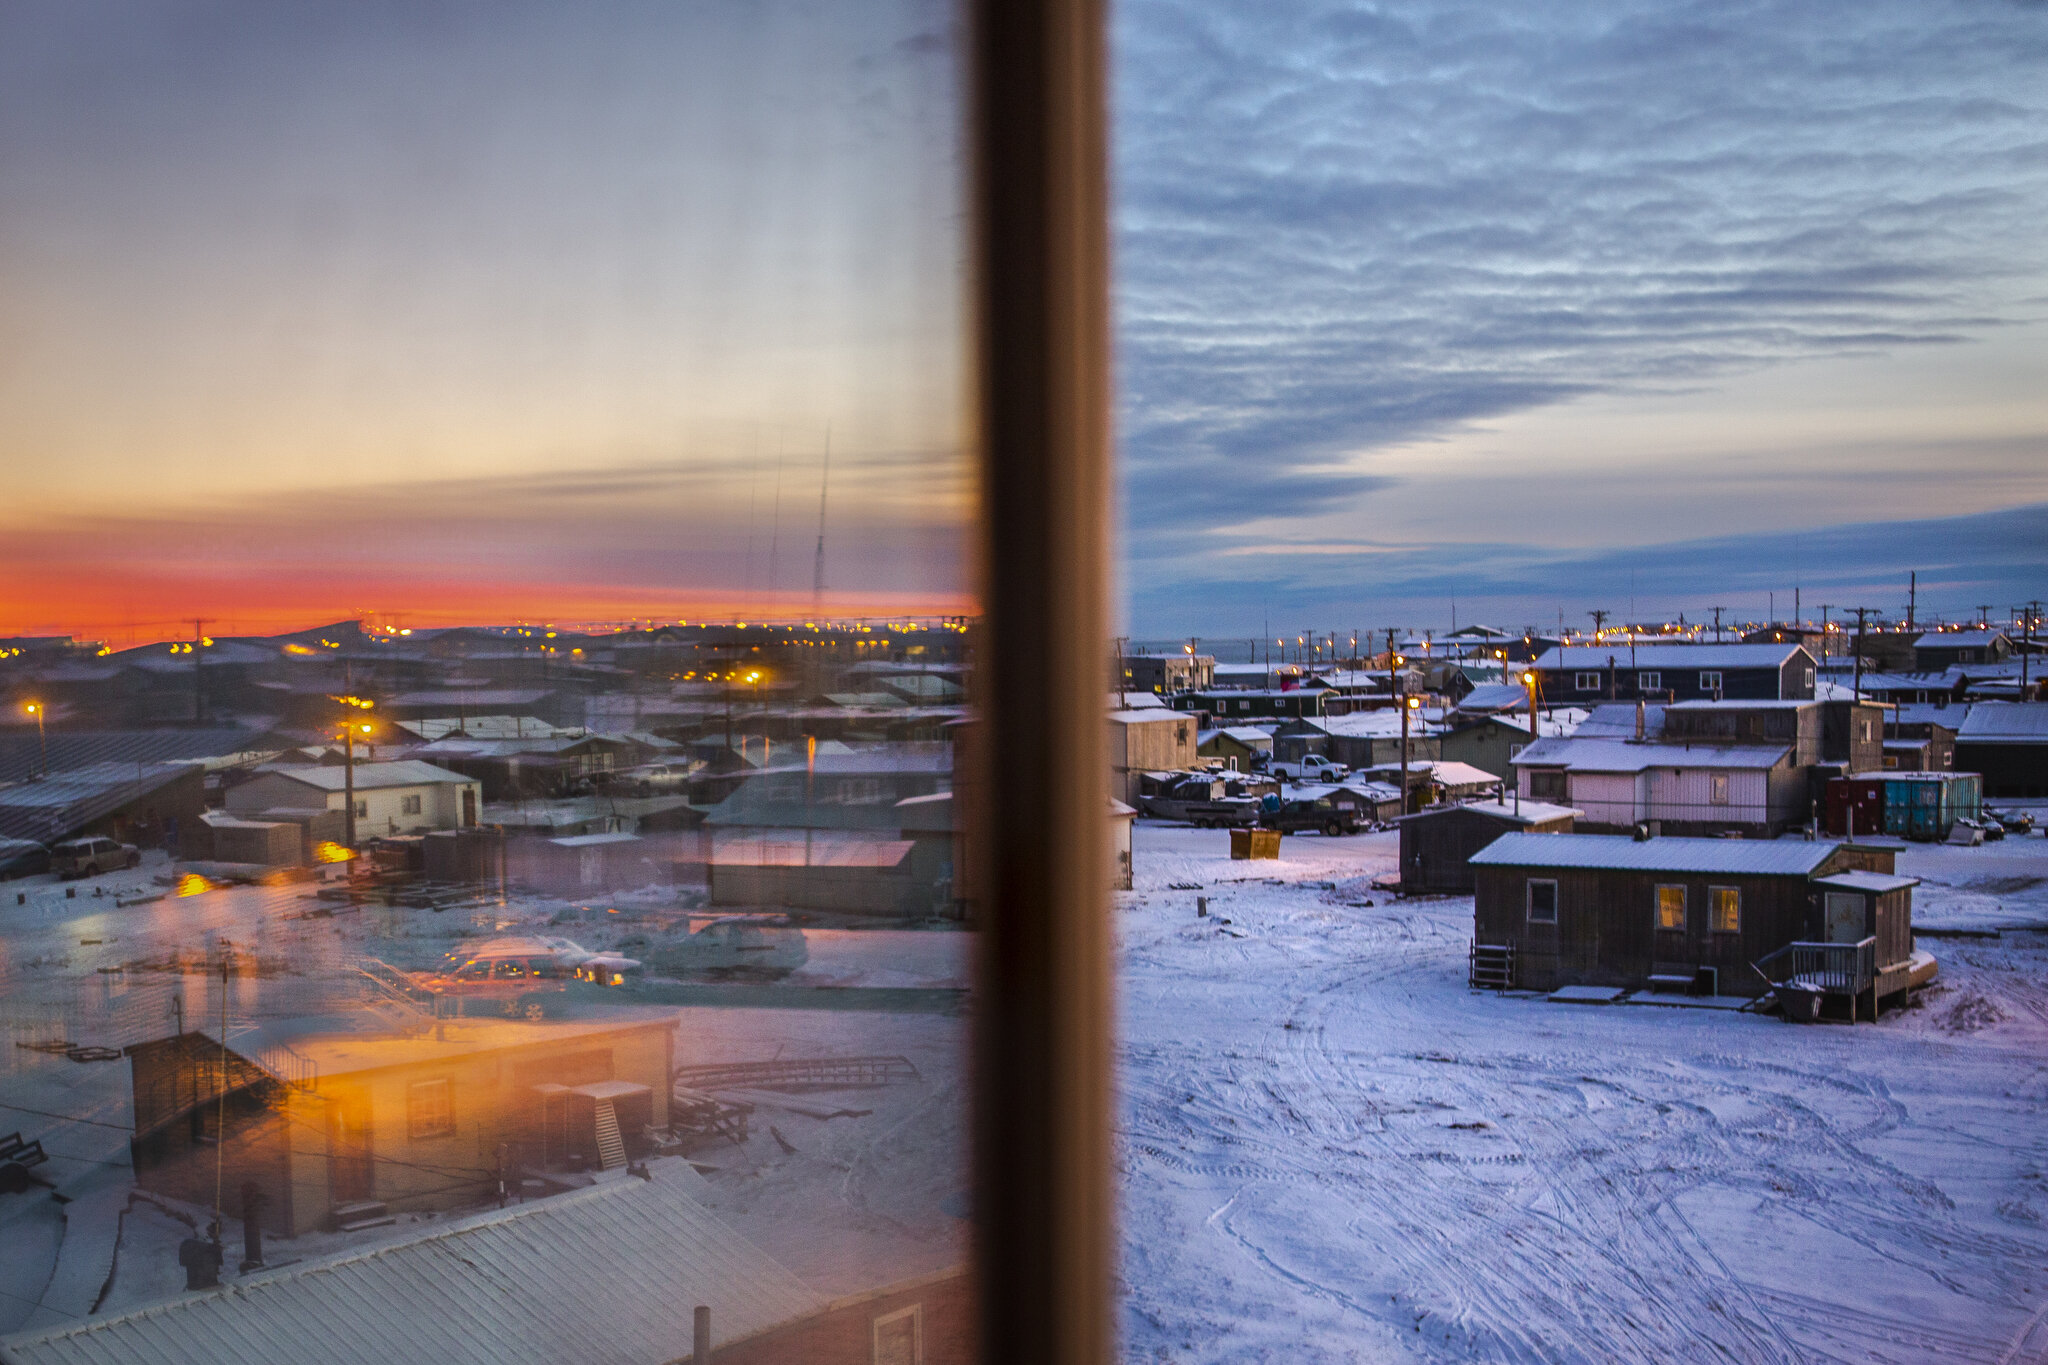  Utqiagvik, Alaska, formerly known as Barrow. October 16th, 2015. July 2019 was officially the warmest month in Alaskan history, and Utqiagvik, the northernmost town in the United States, has been labeled “ground zero for climate change.” 